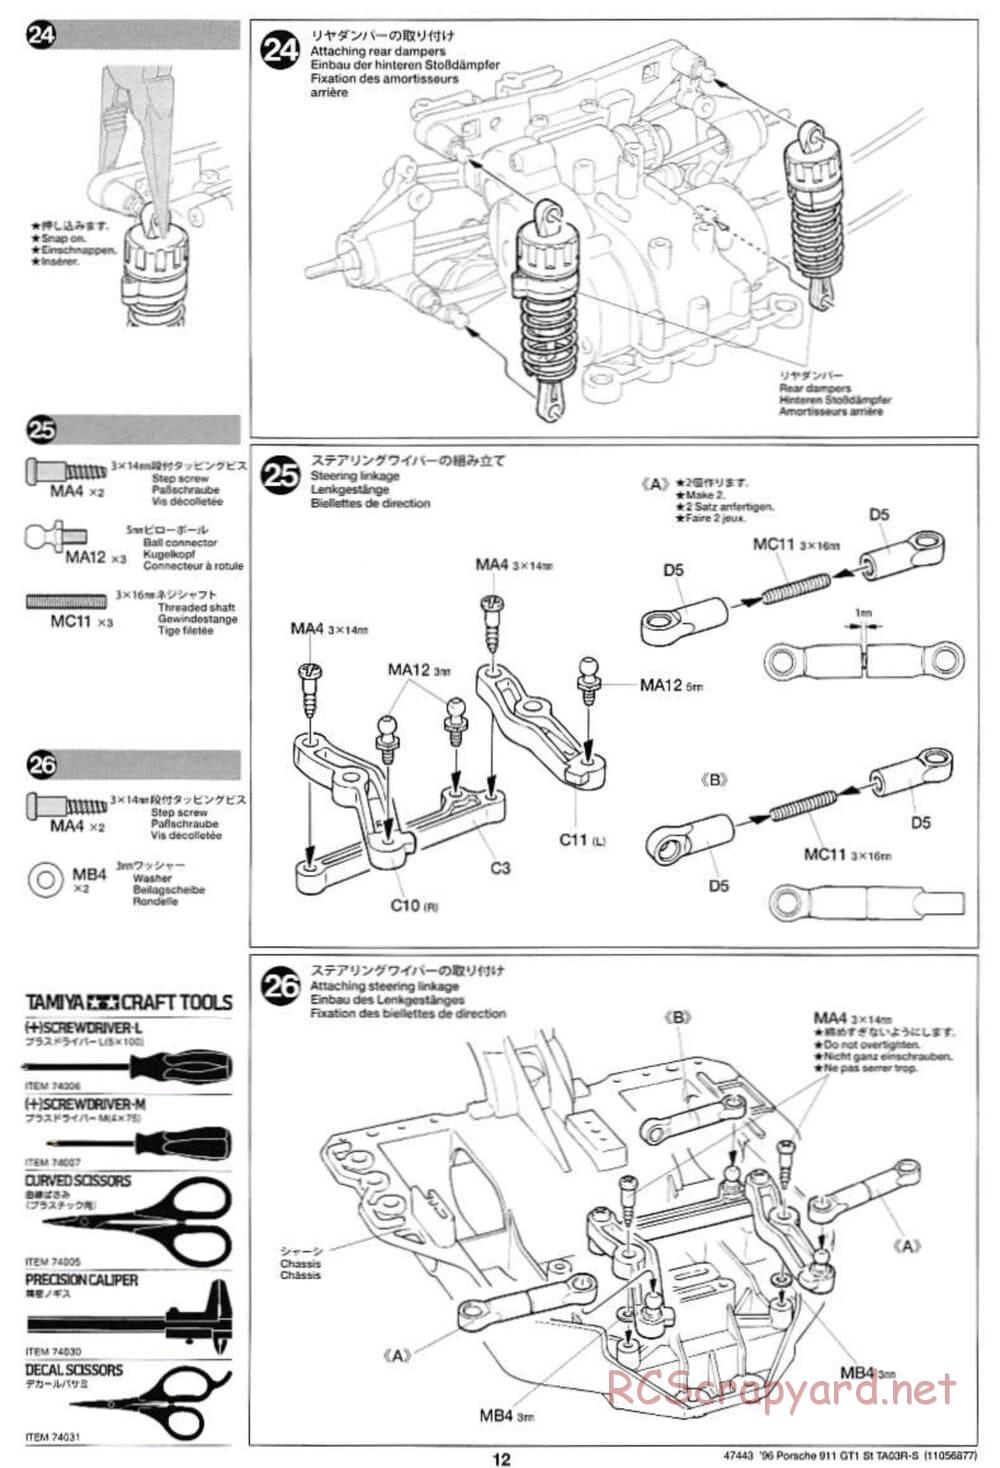 Tamiya - Porsche 911 GT1 Street - TA-03RS Chassis - Manual - Page 12